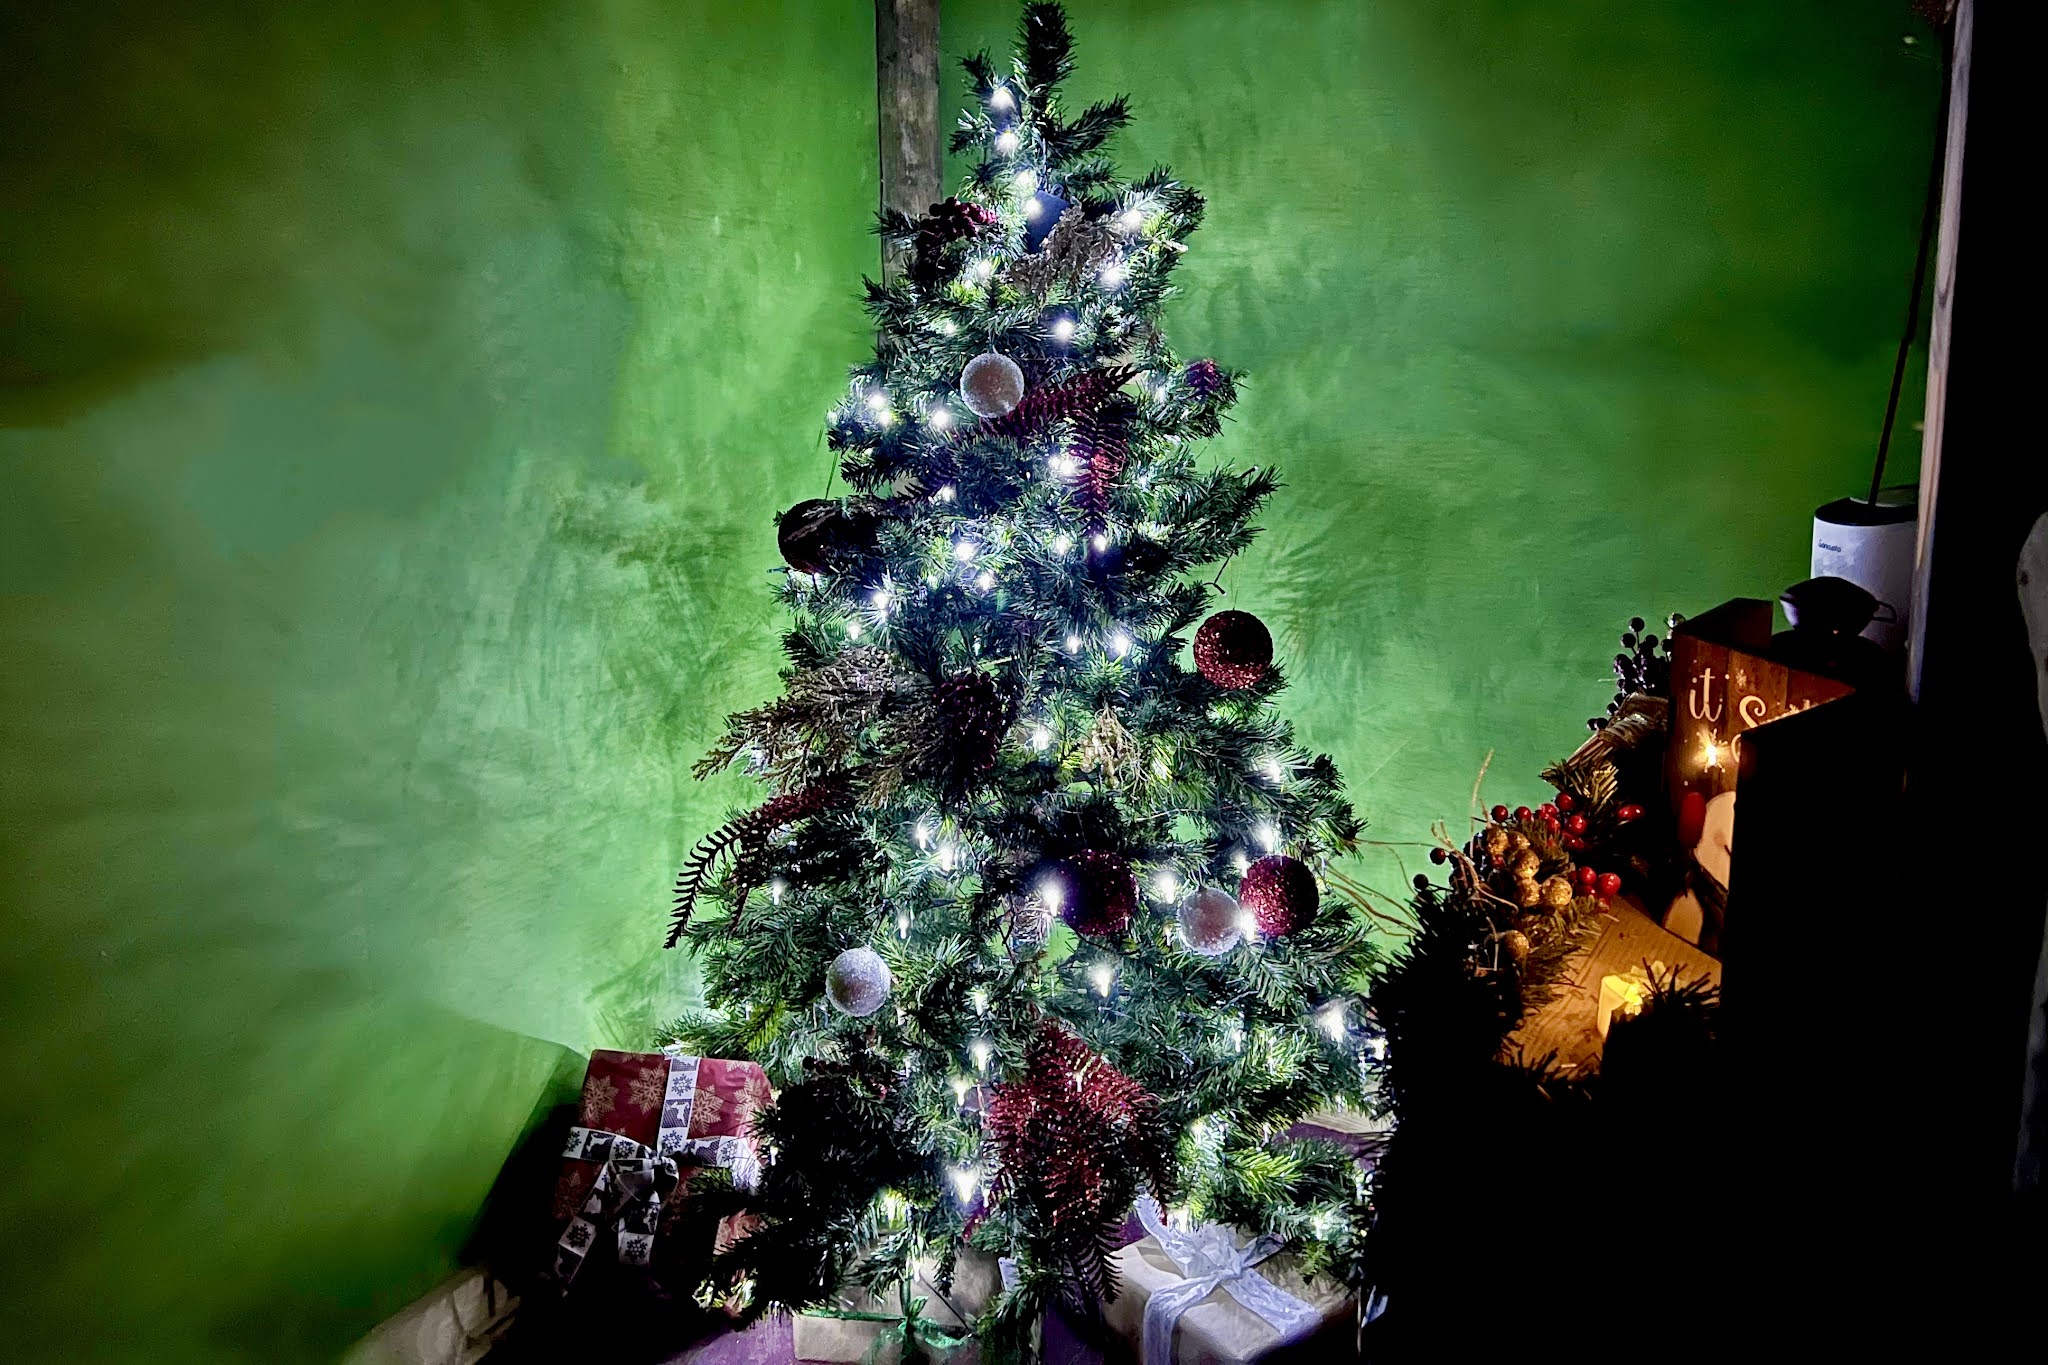 A christmas tree with presents underneath it and a green background